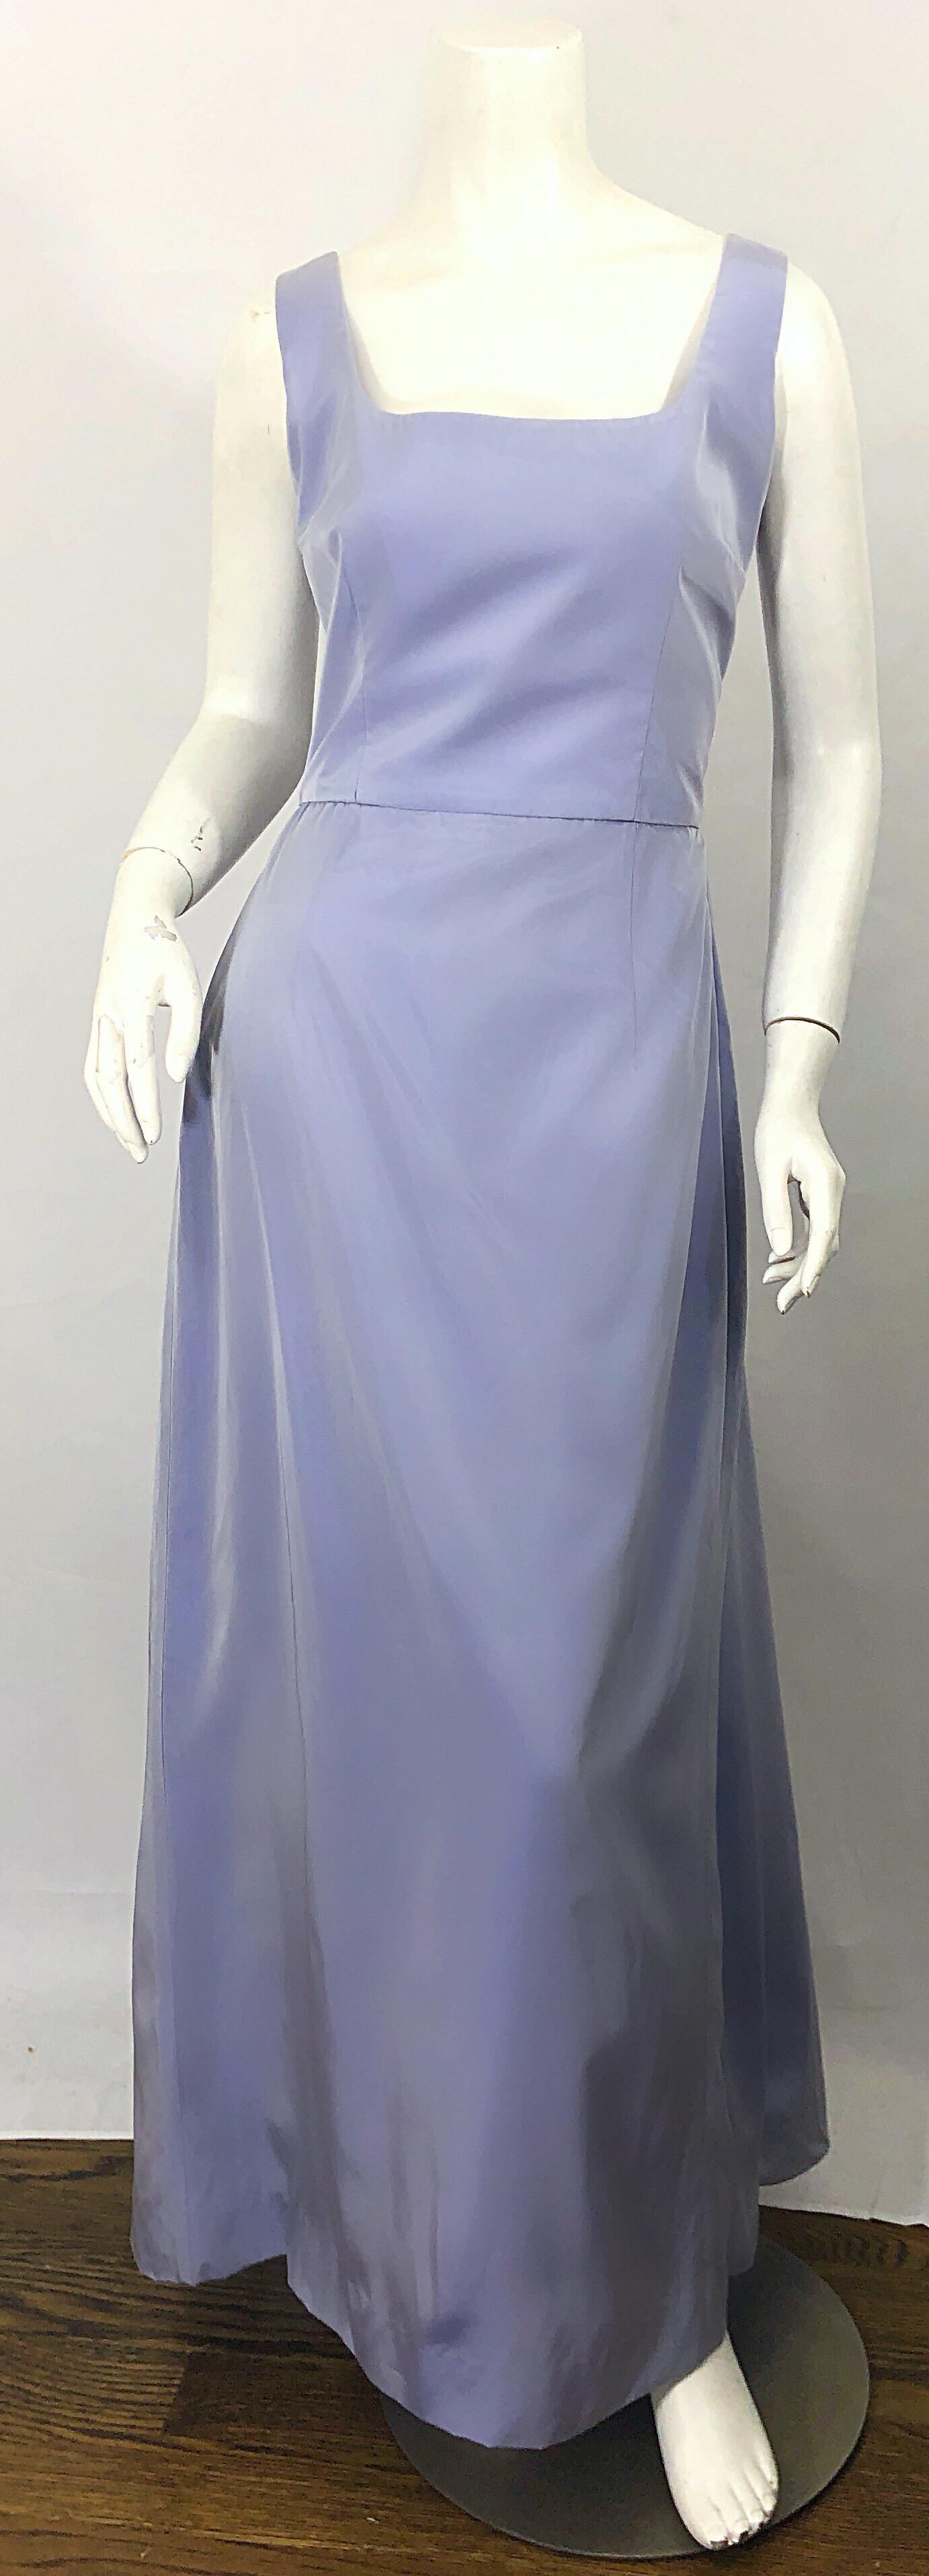 Gorgeous classic late 1990s HEIDI WEISEL light purple / lavender lilac silk taffeta sleeveless gown! This dress is made for a princess, and looks stunning on! Weisel is known for her red carpet looks, and has received numerous CFDA awards for her